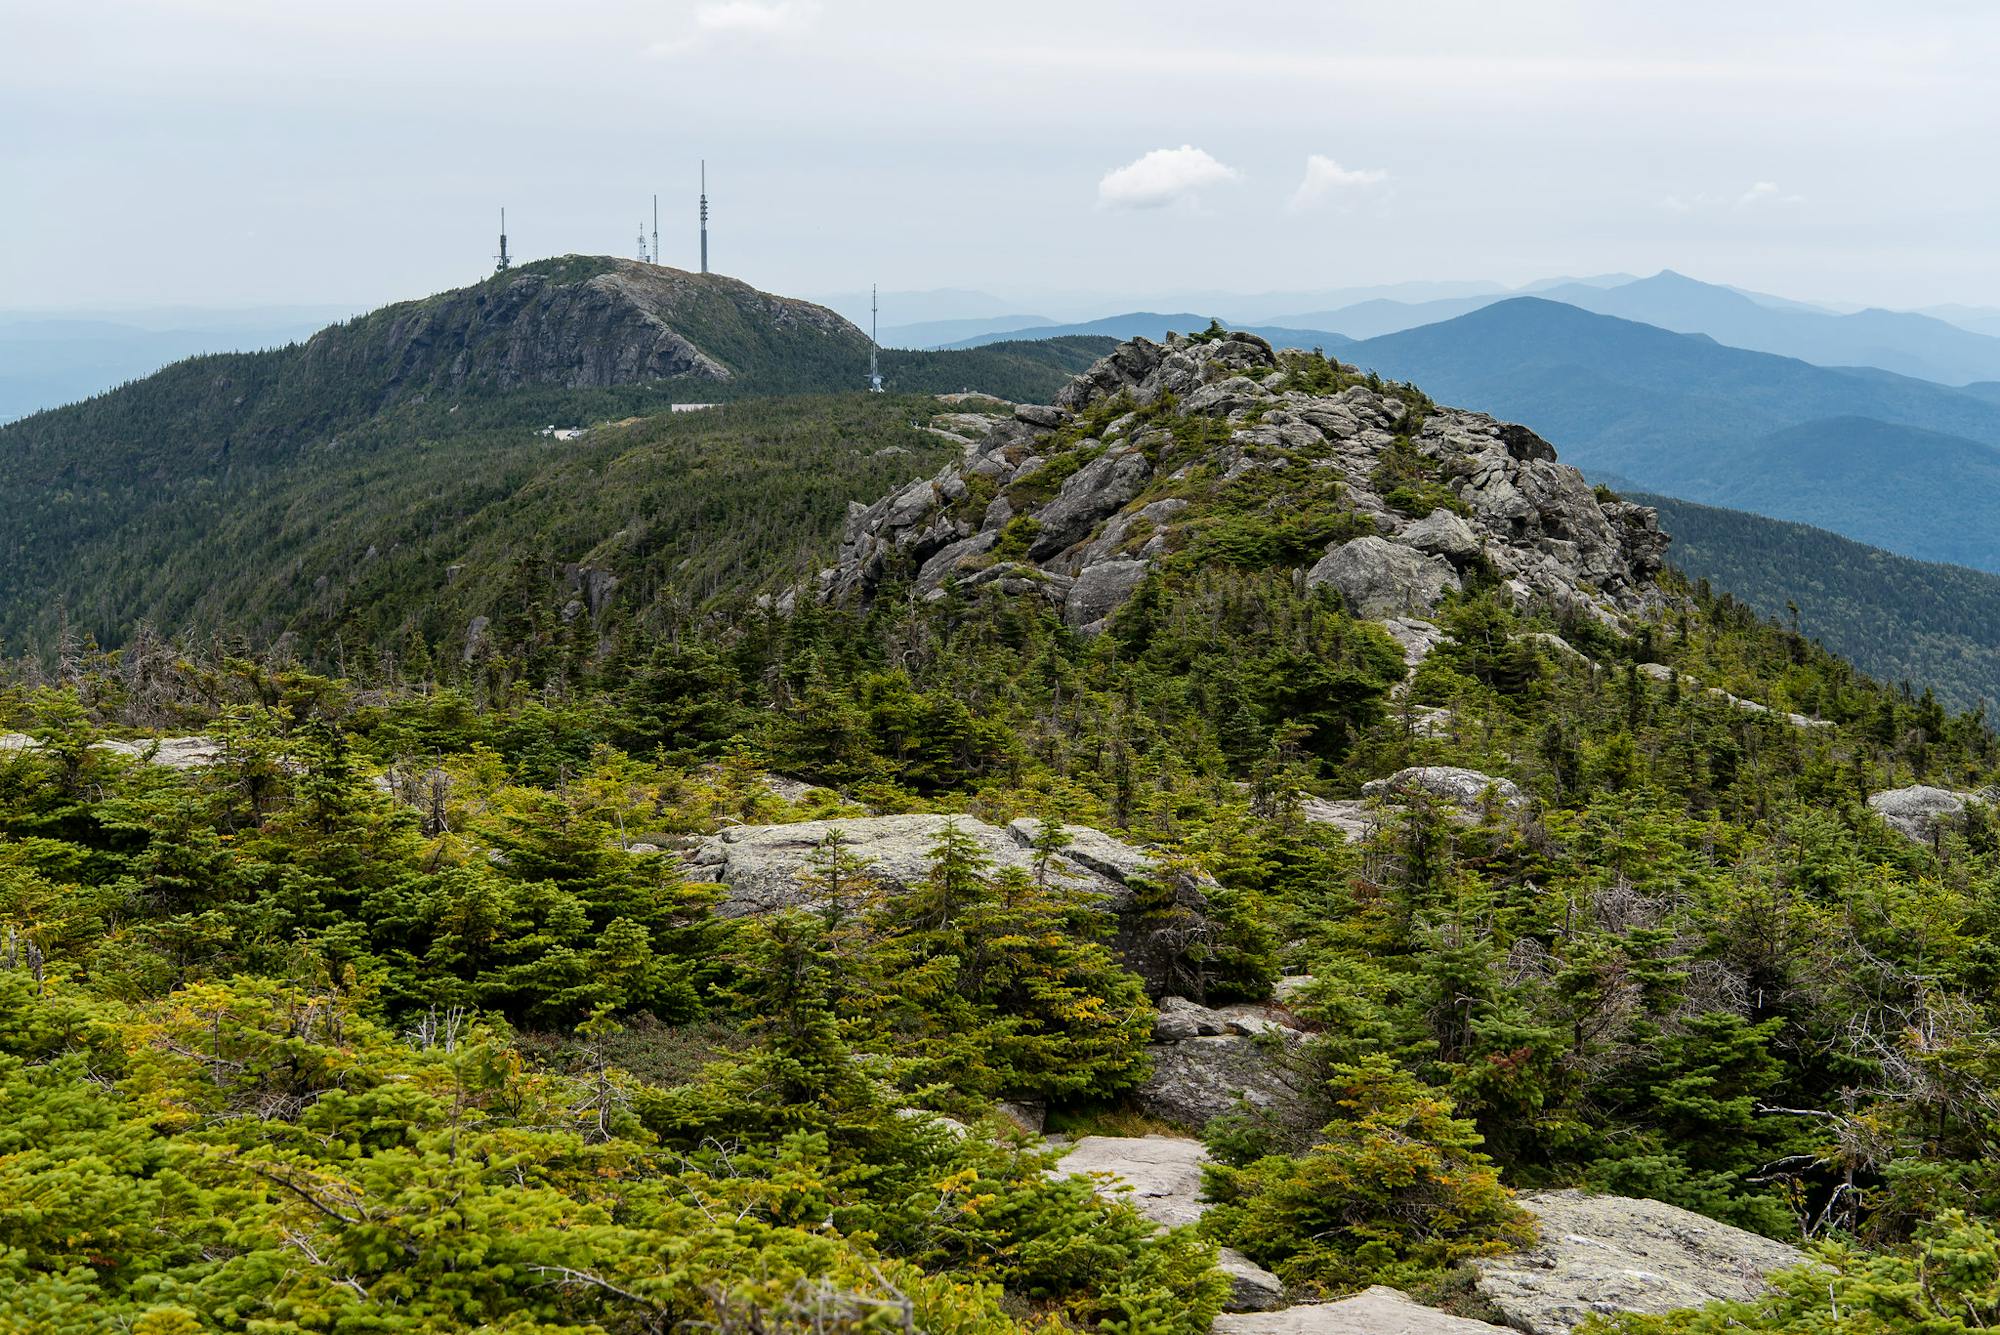 On top of Mount Mansfield